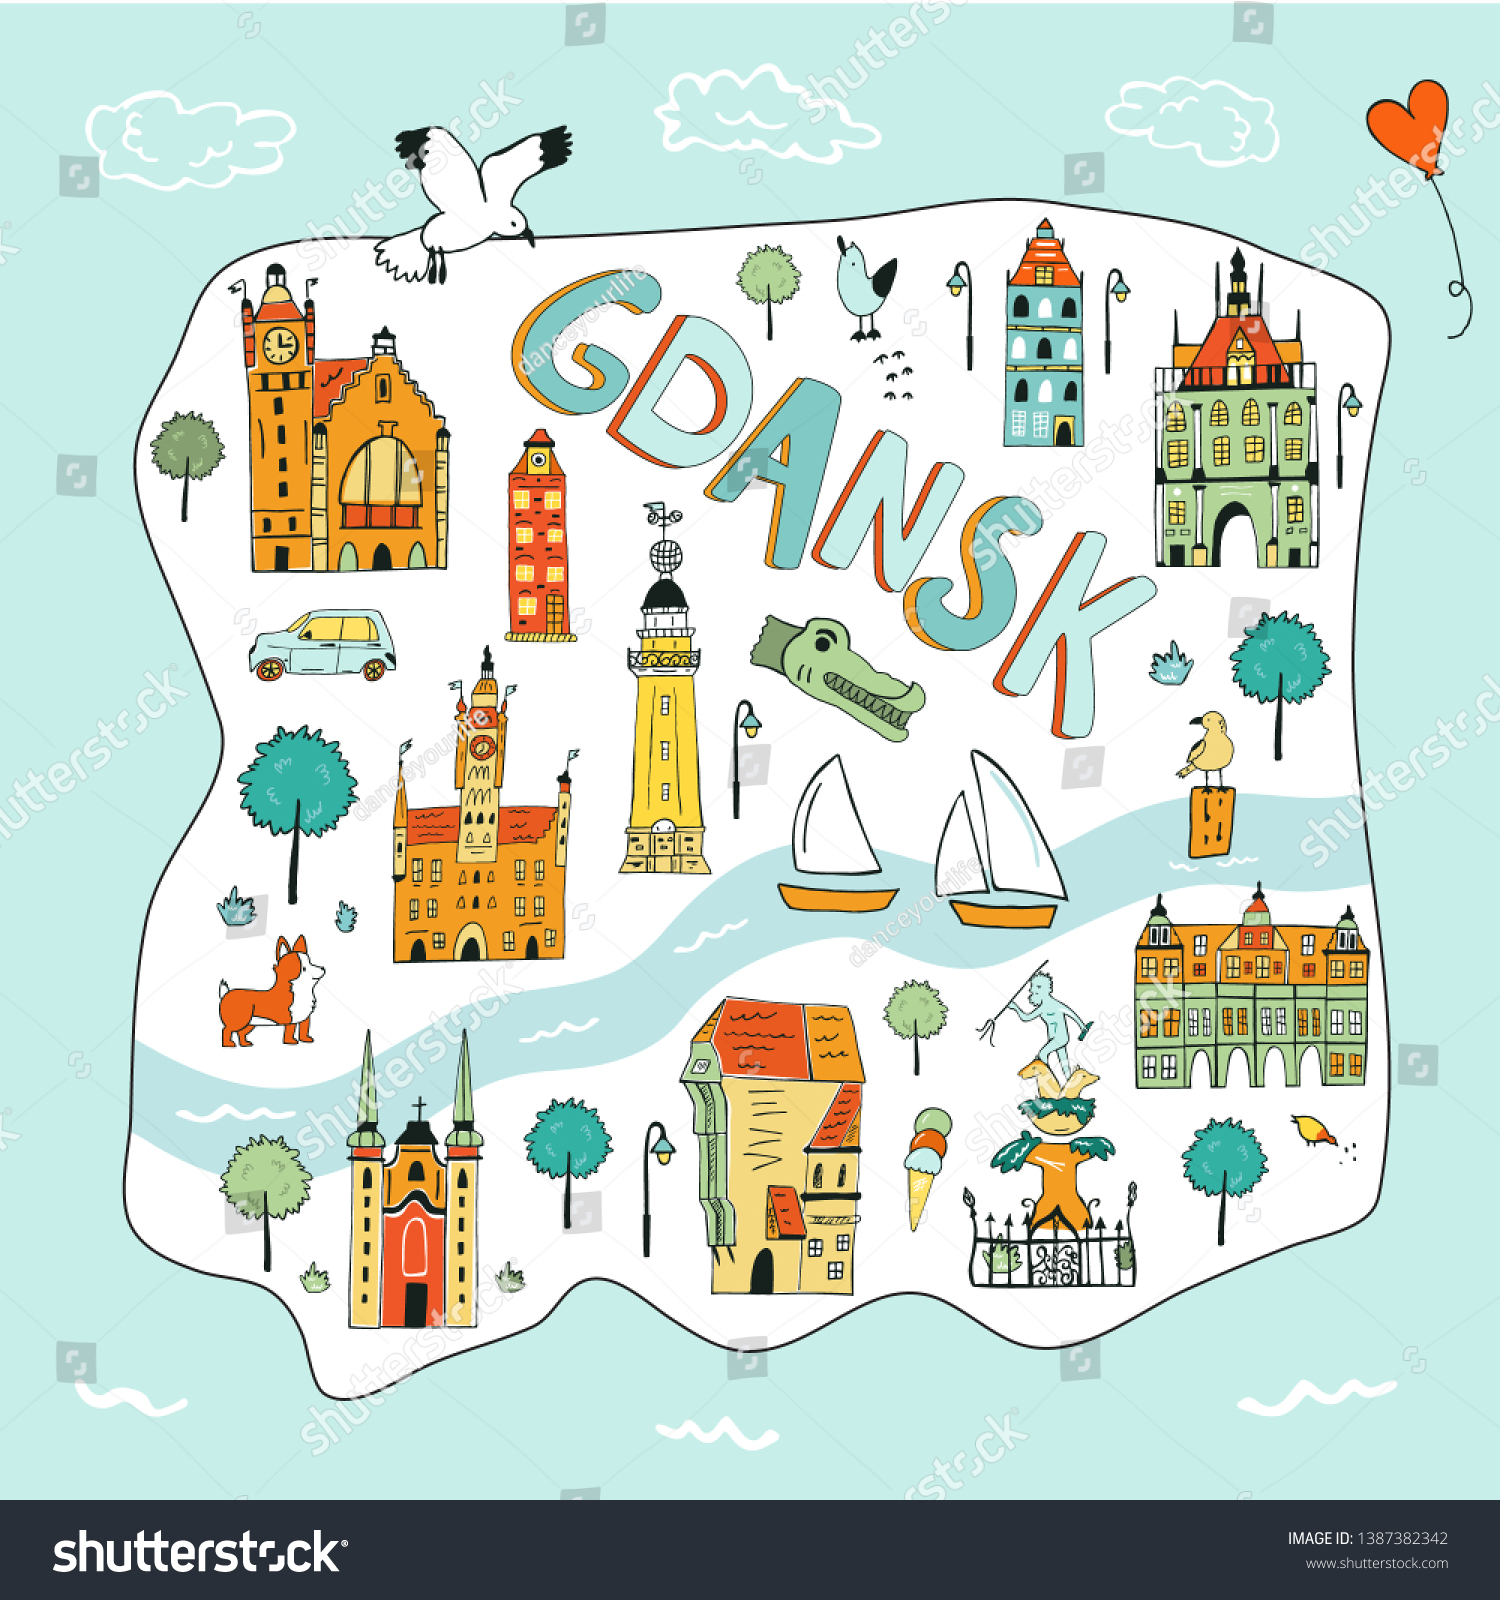 Hand Drawn Illustrated Map Of Gdansk With Royalty Free Stock Vector 1387382342 9326